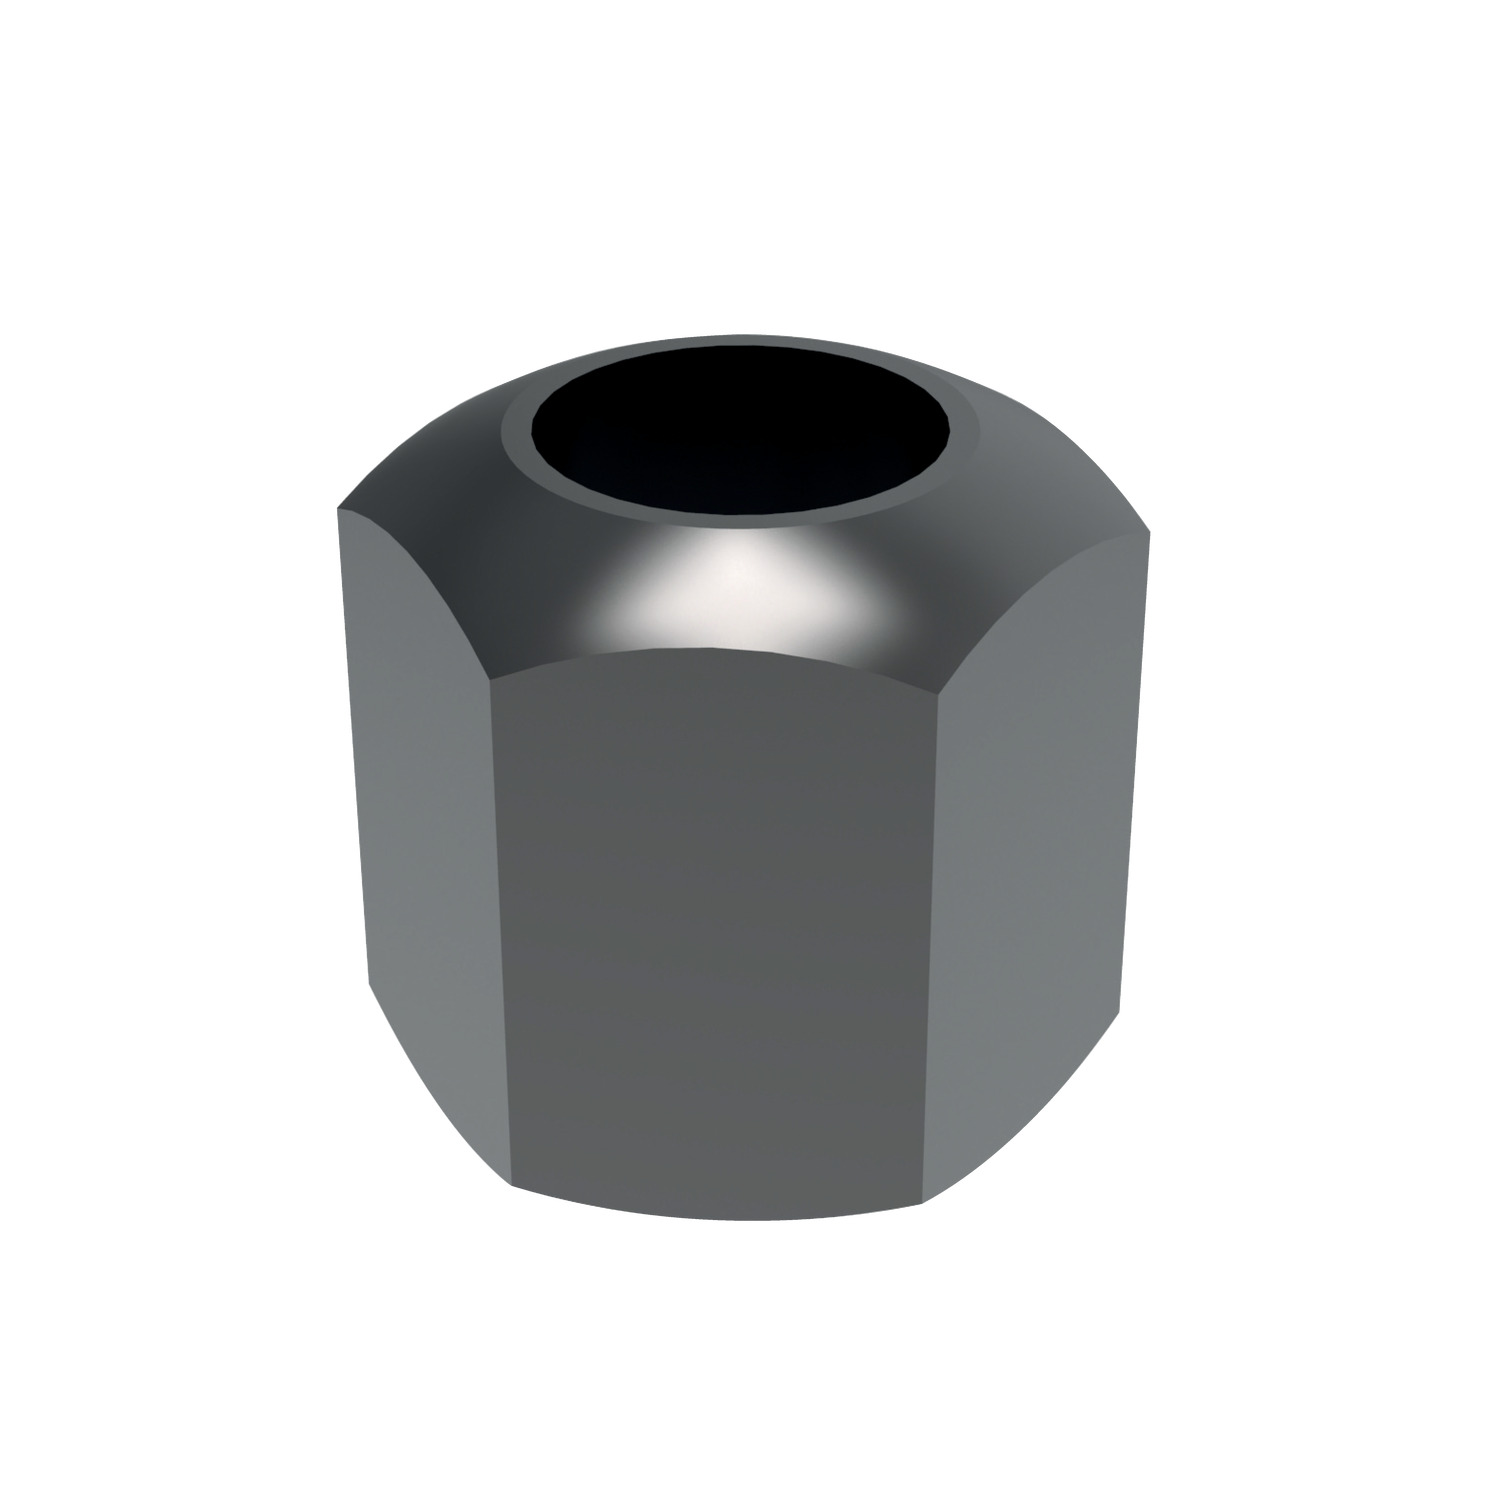 Product 24300, Fixture Nuts strength class 10 / 